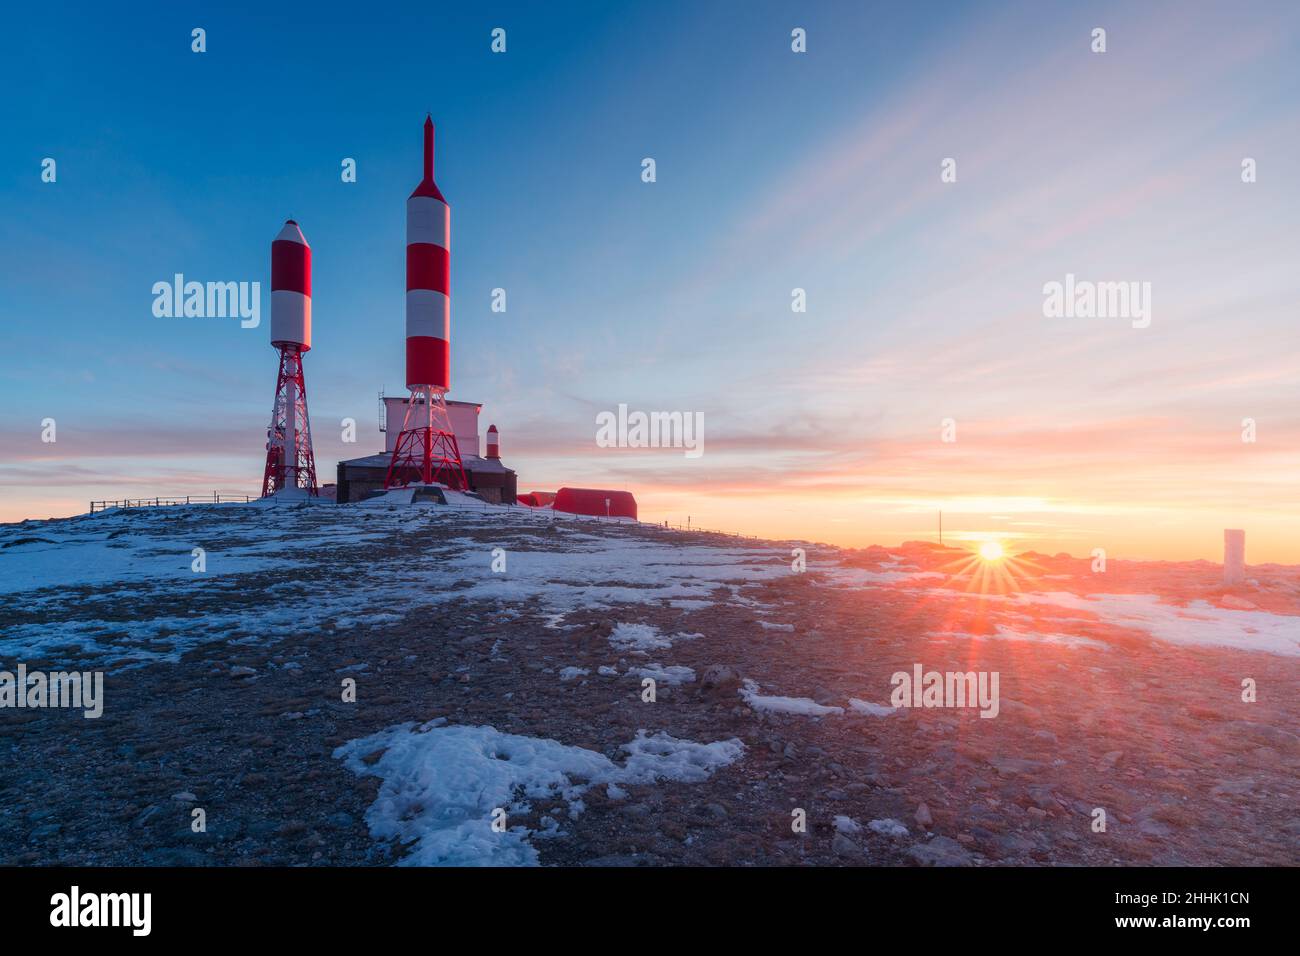 Station with radio and television signal repeater antennas with curious rocket shape located on snowy mountain on winter day in Spain Stock Photo